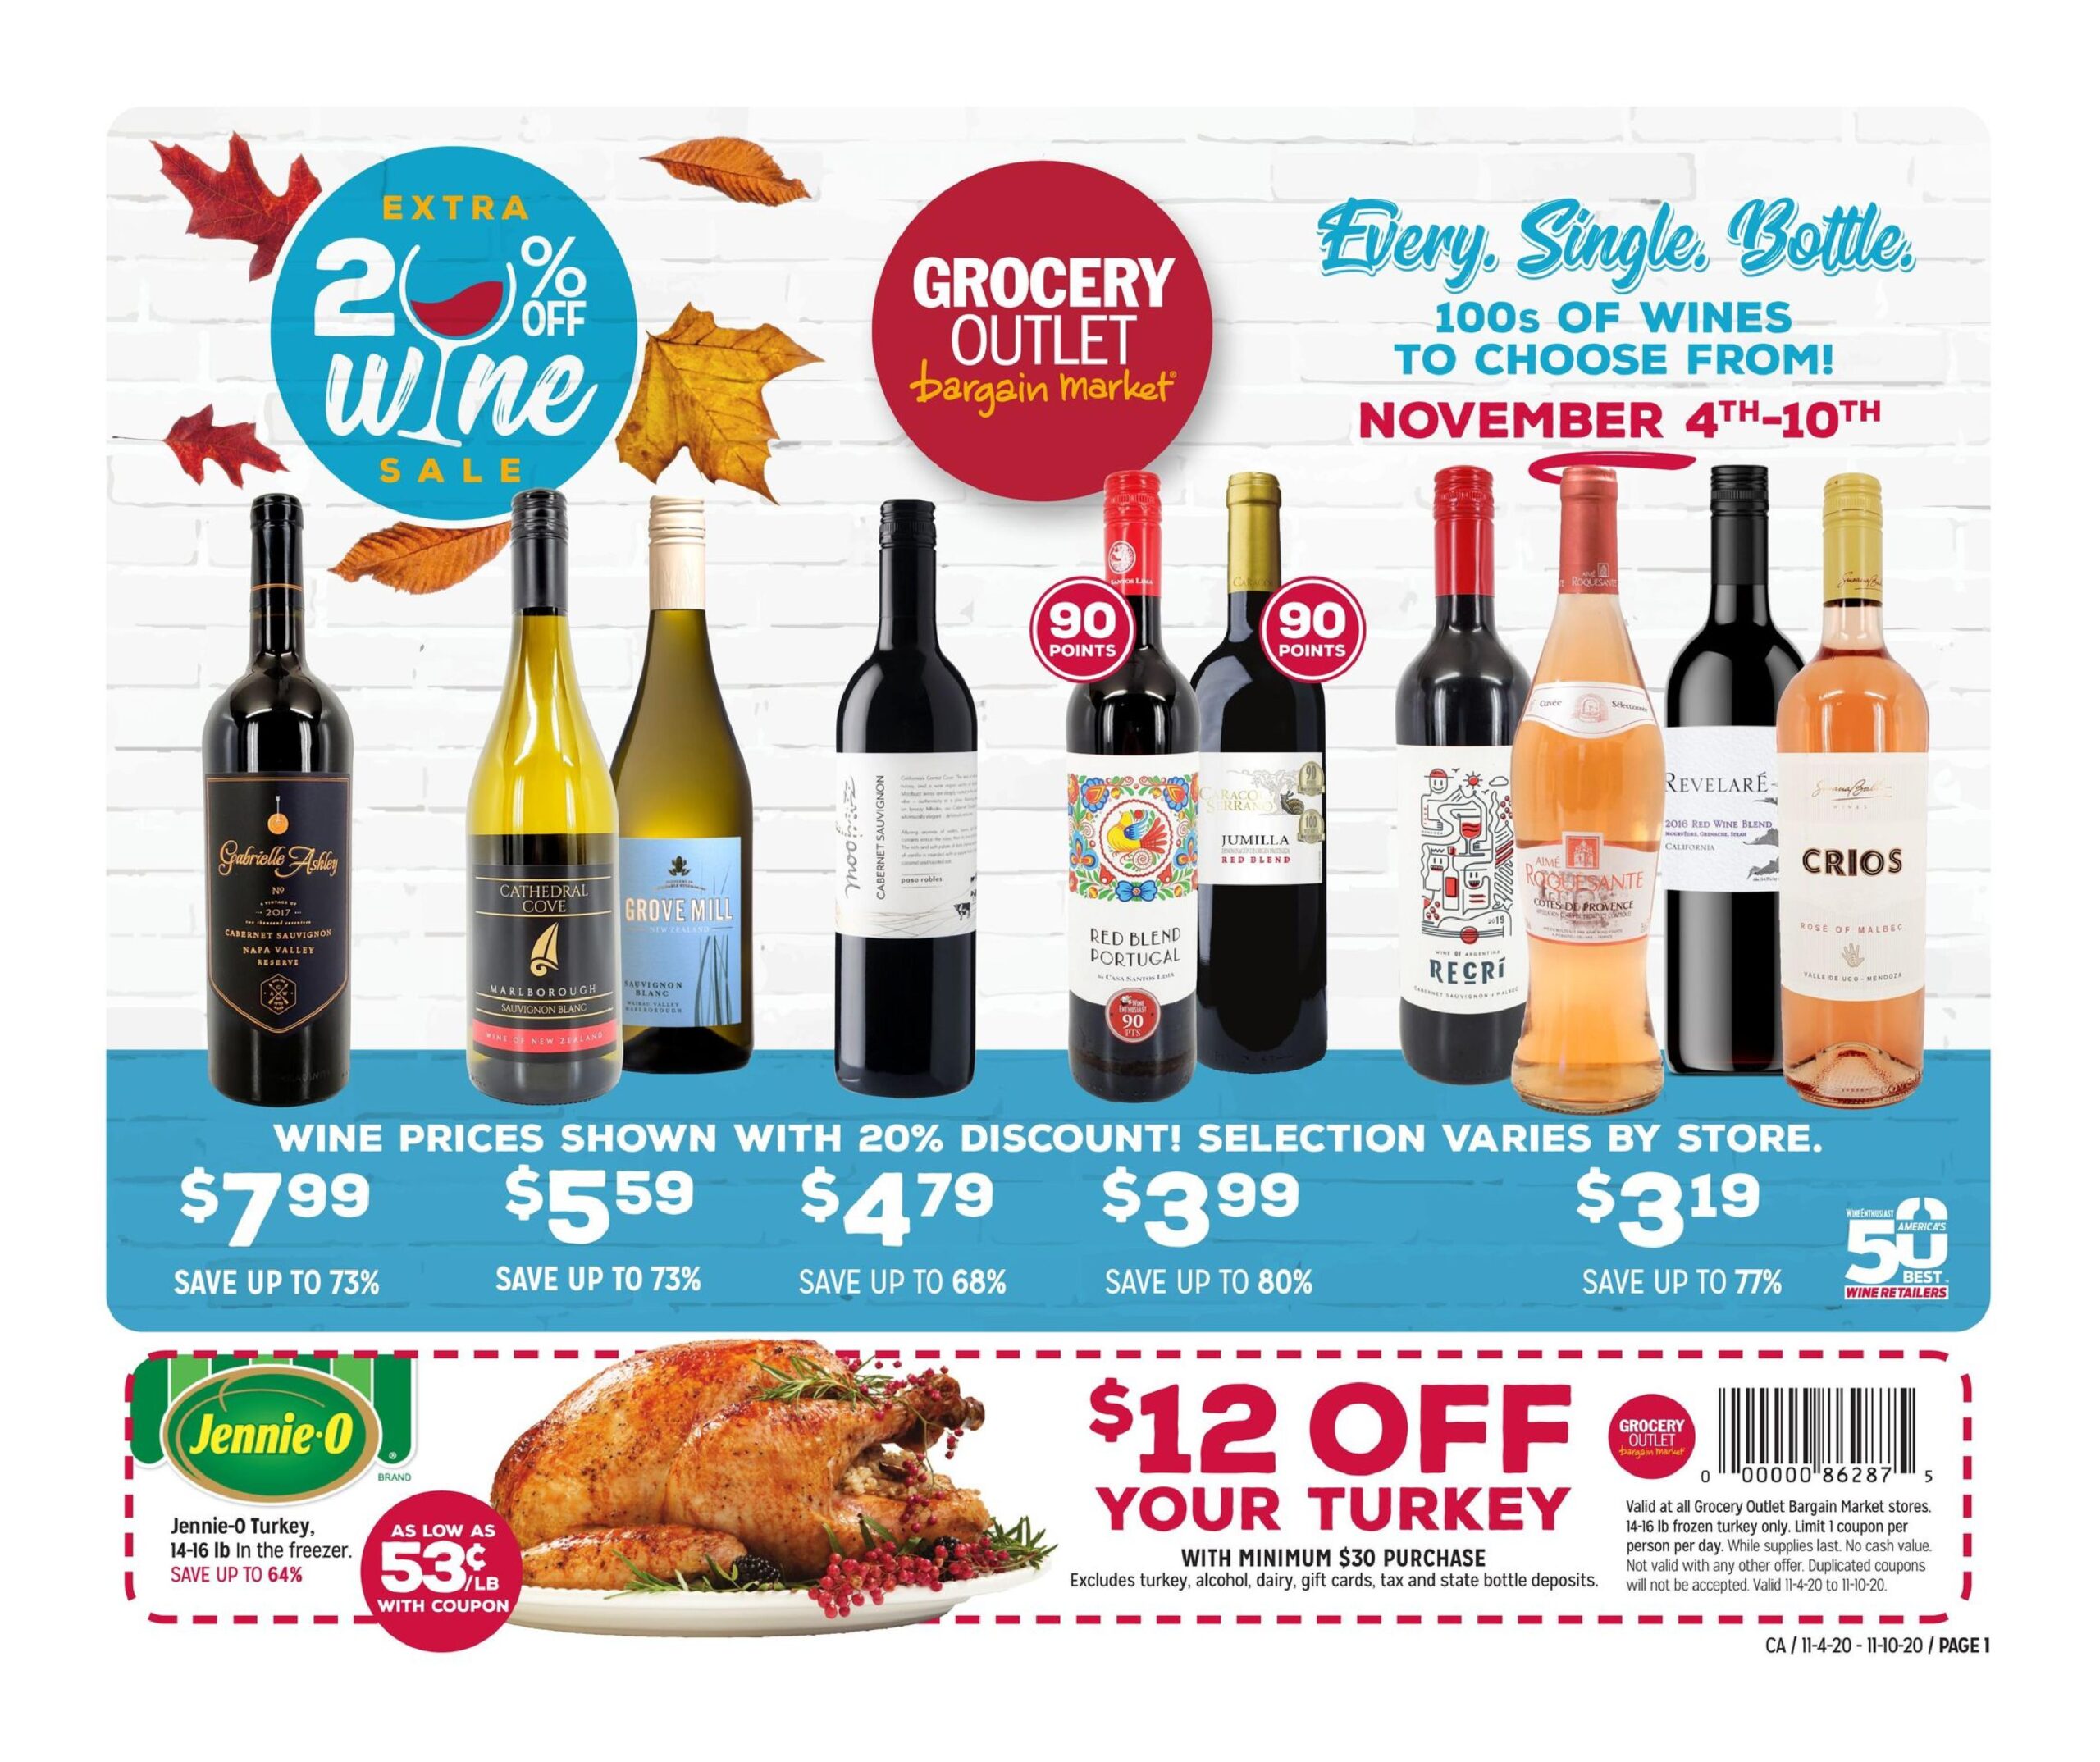 The Grocery Outlet Wine Sale is back! Stock up for the Holidays